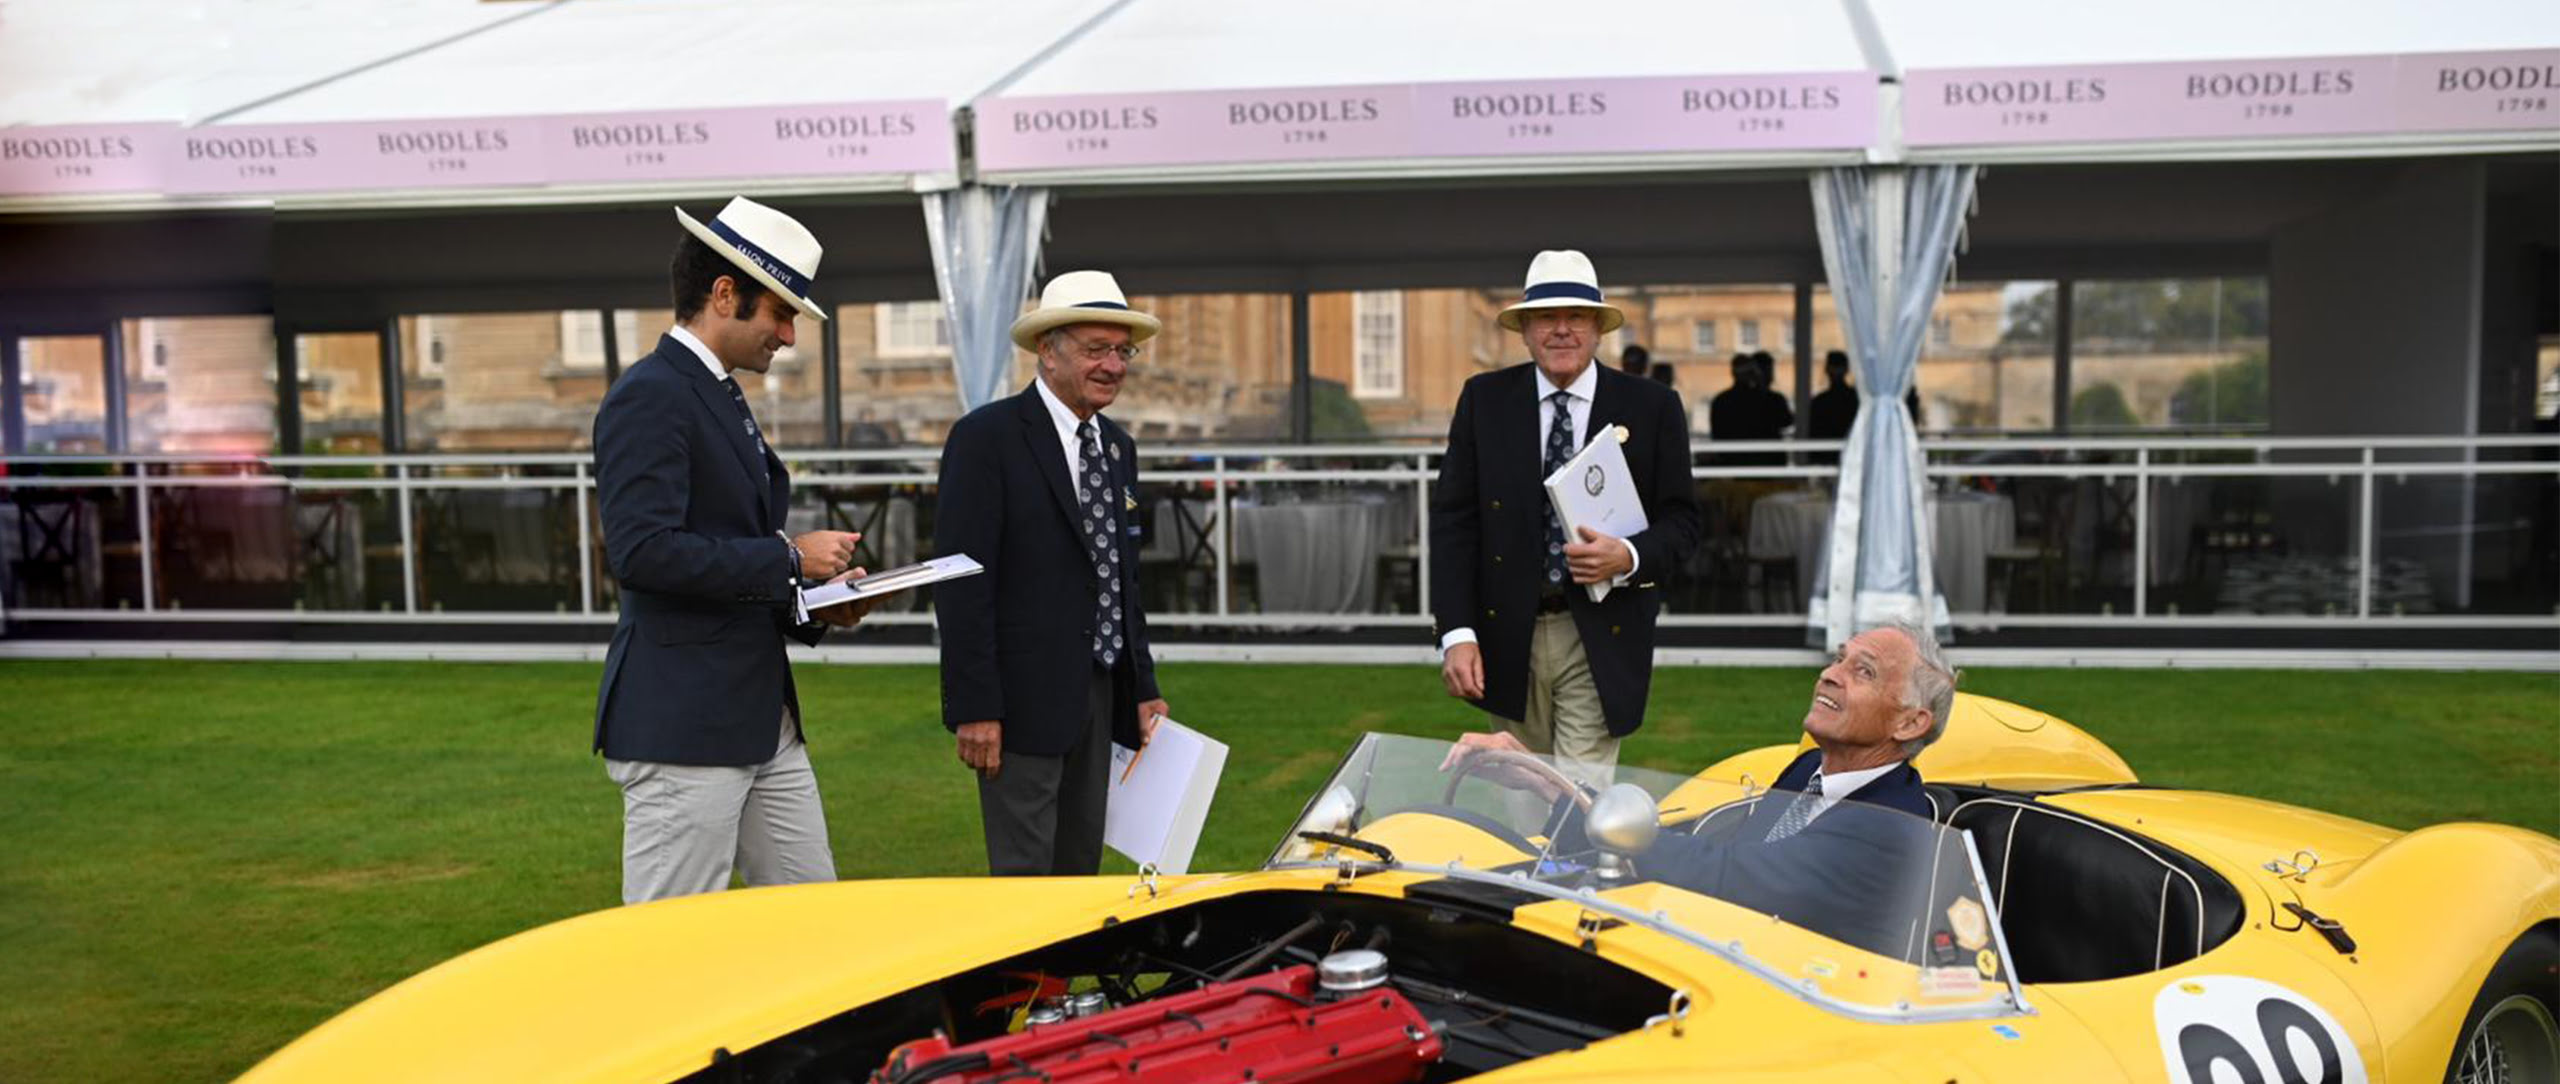 The Hybrid Judging experiment was tested successfully at Salon Prive image